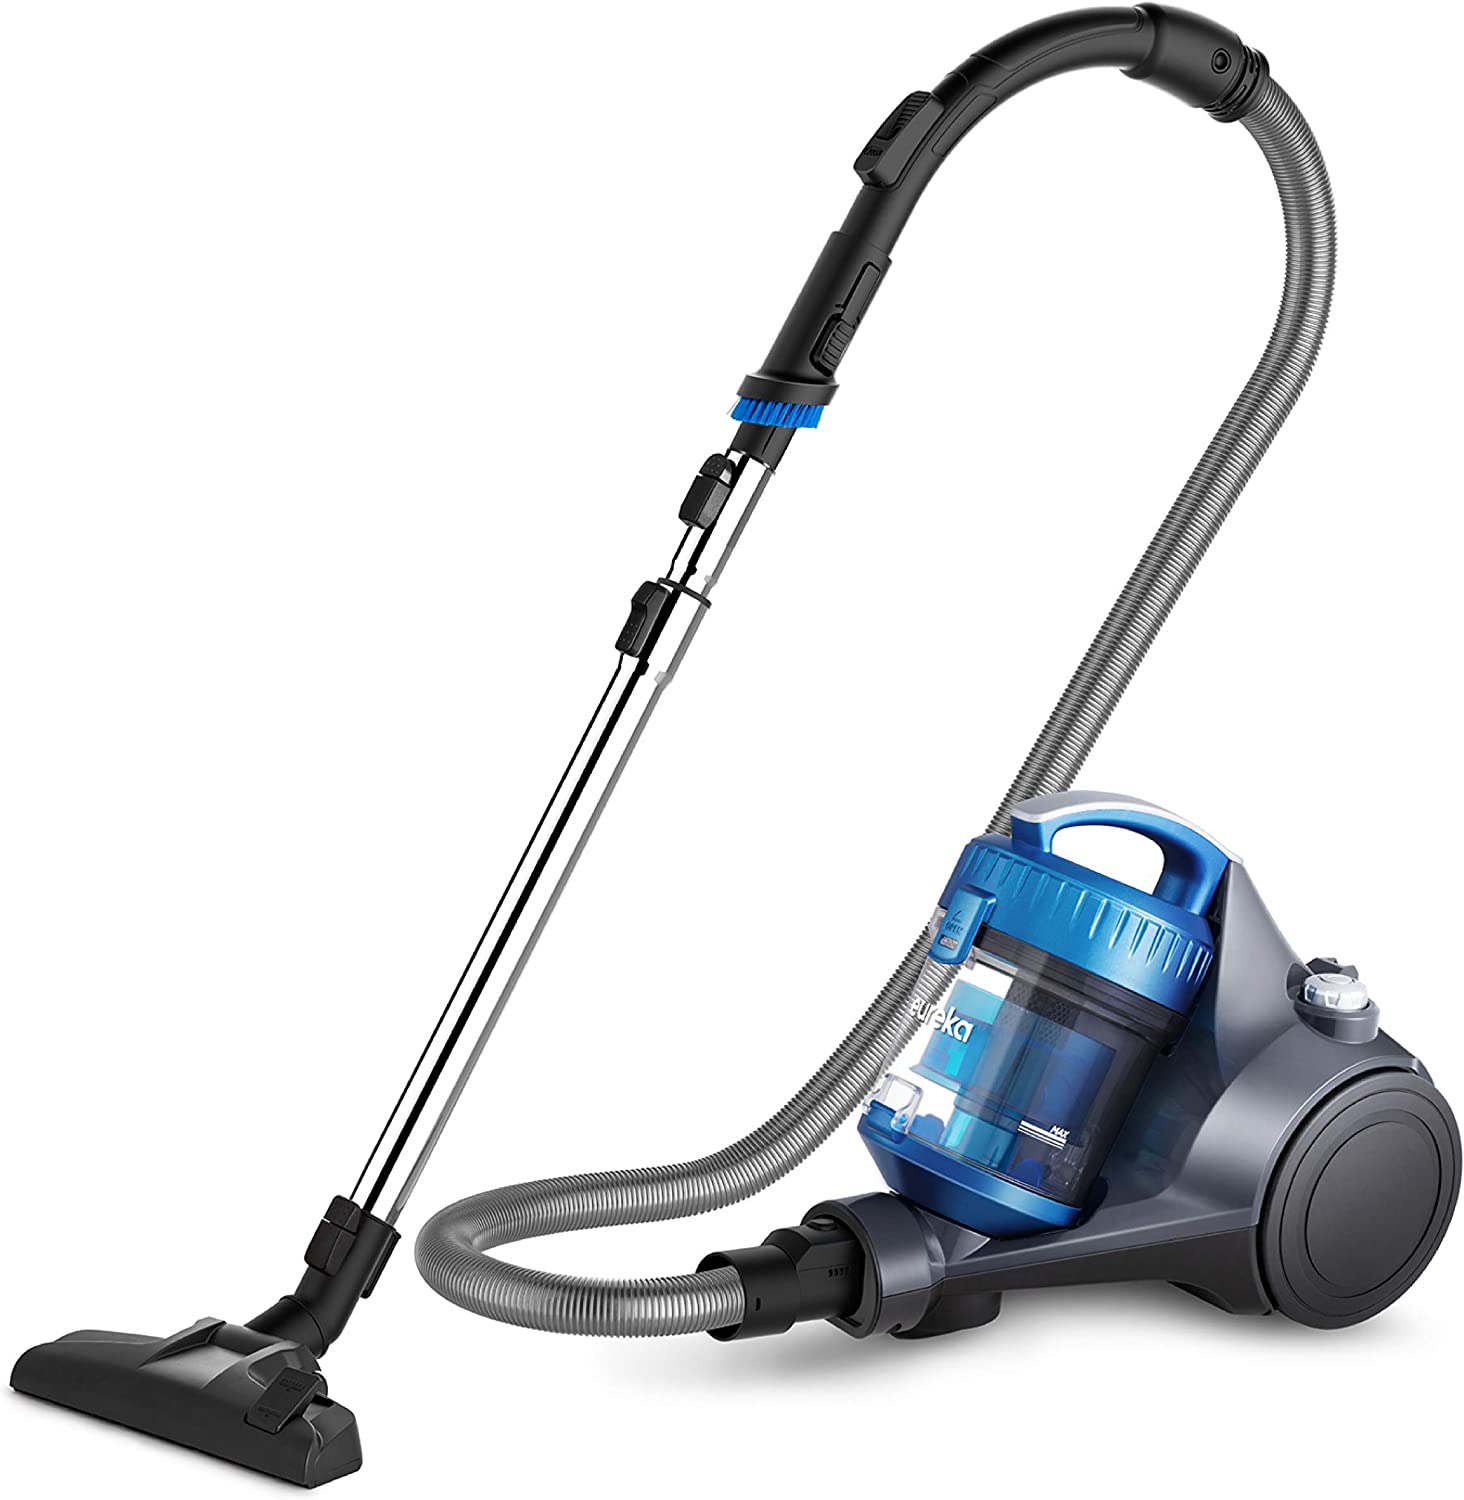 Eureka WhirlWind Bagless Canister Vacuum Cleaner Lightweight Vac For Carpets And Hard Floors Blue 